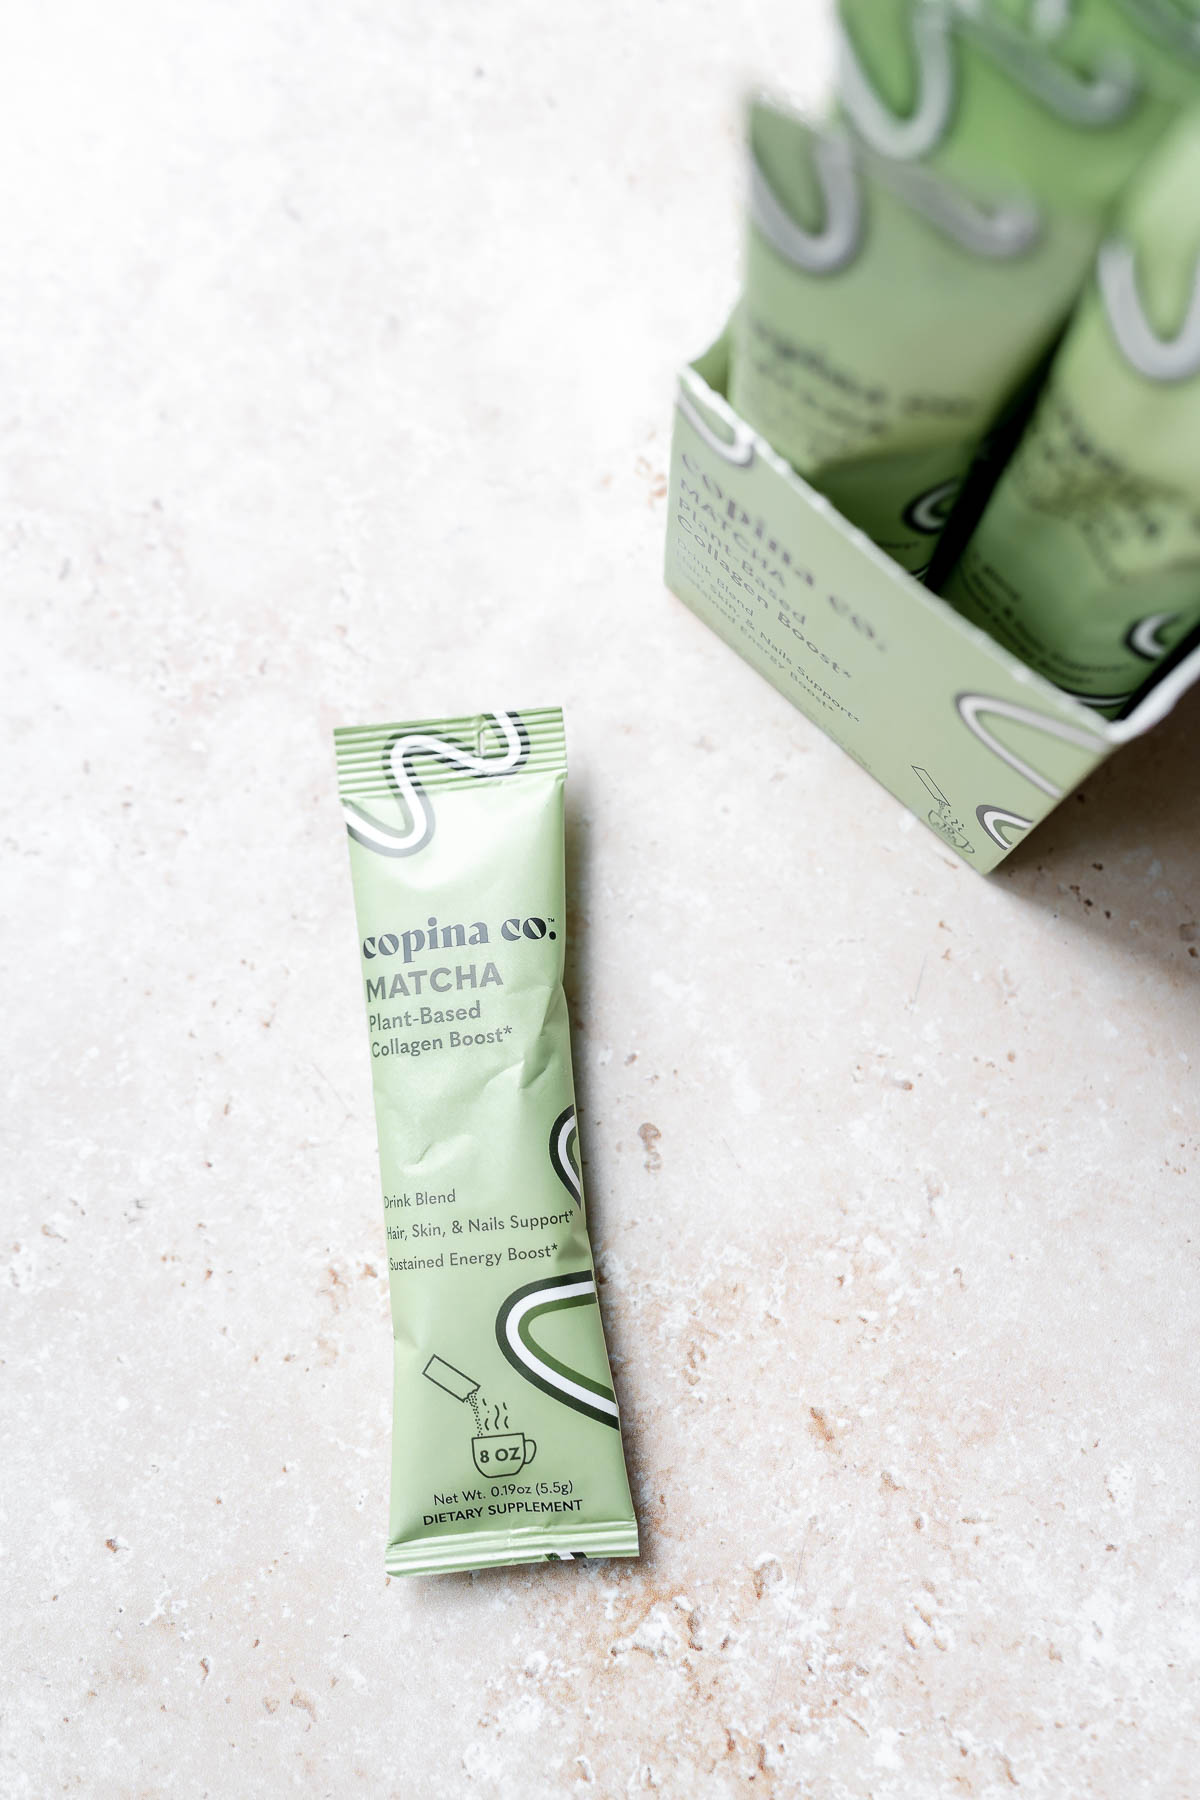 A small green package of copina co. plant-based collagen boost.